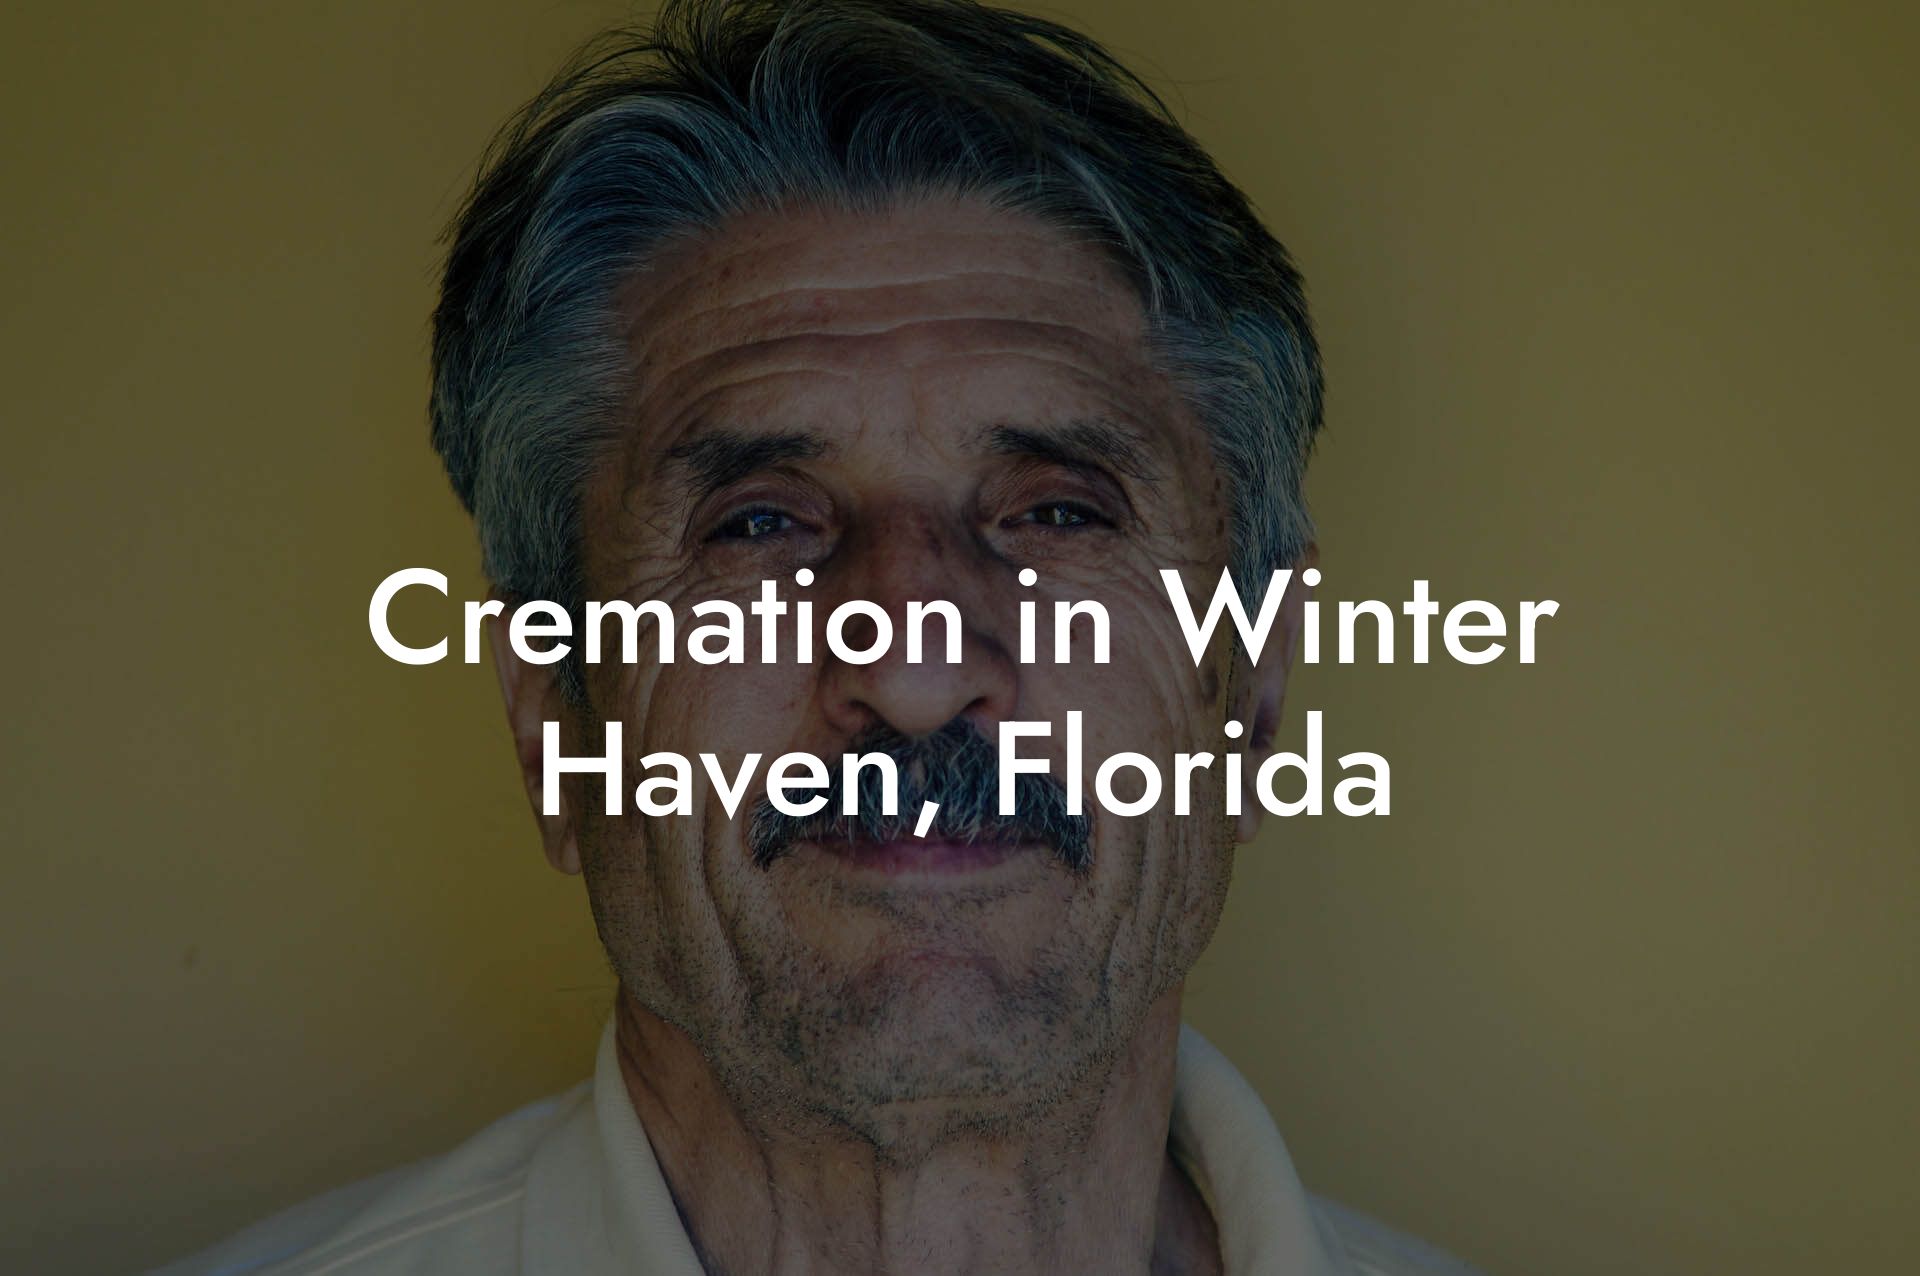 Cremation in Winter Haven, Florida